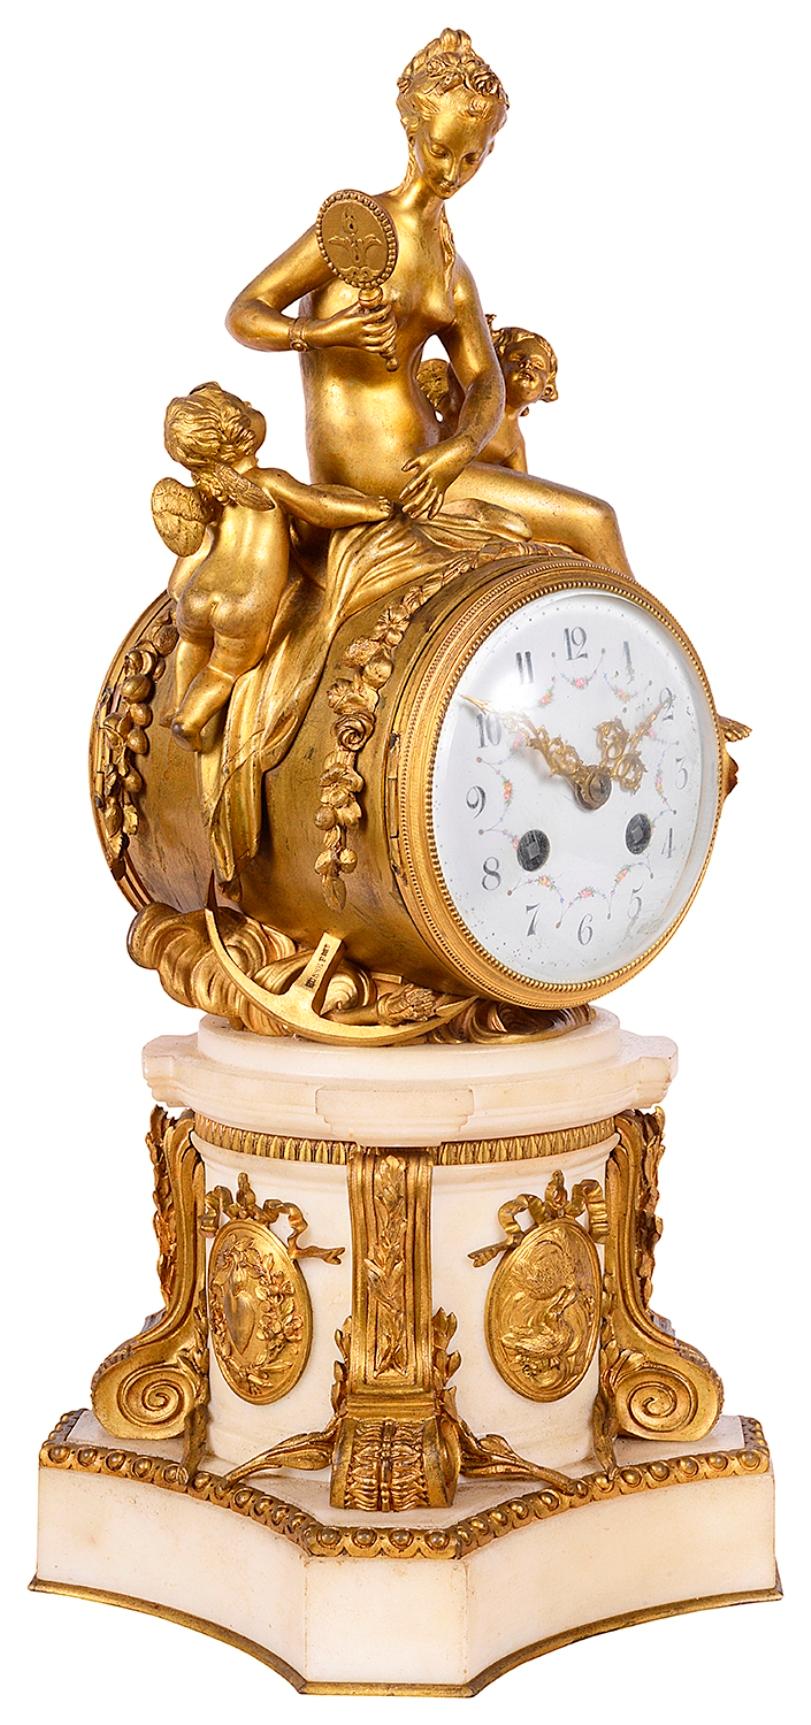 A very impressive 19th century classical French Louis XVI style mantel clock, having gilded ormolu figures of a naked maiden looking in a mirror with two cherubs to her side, above a white enamel clock face, the movement having an eight day